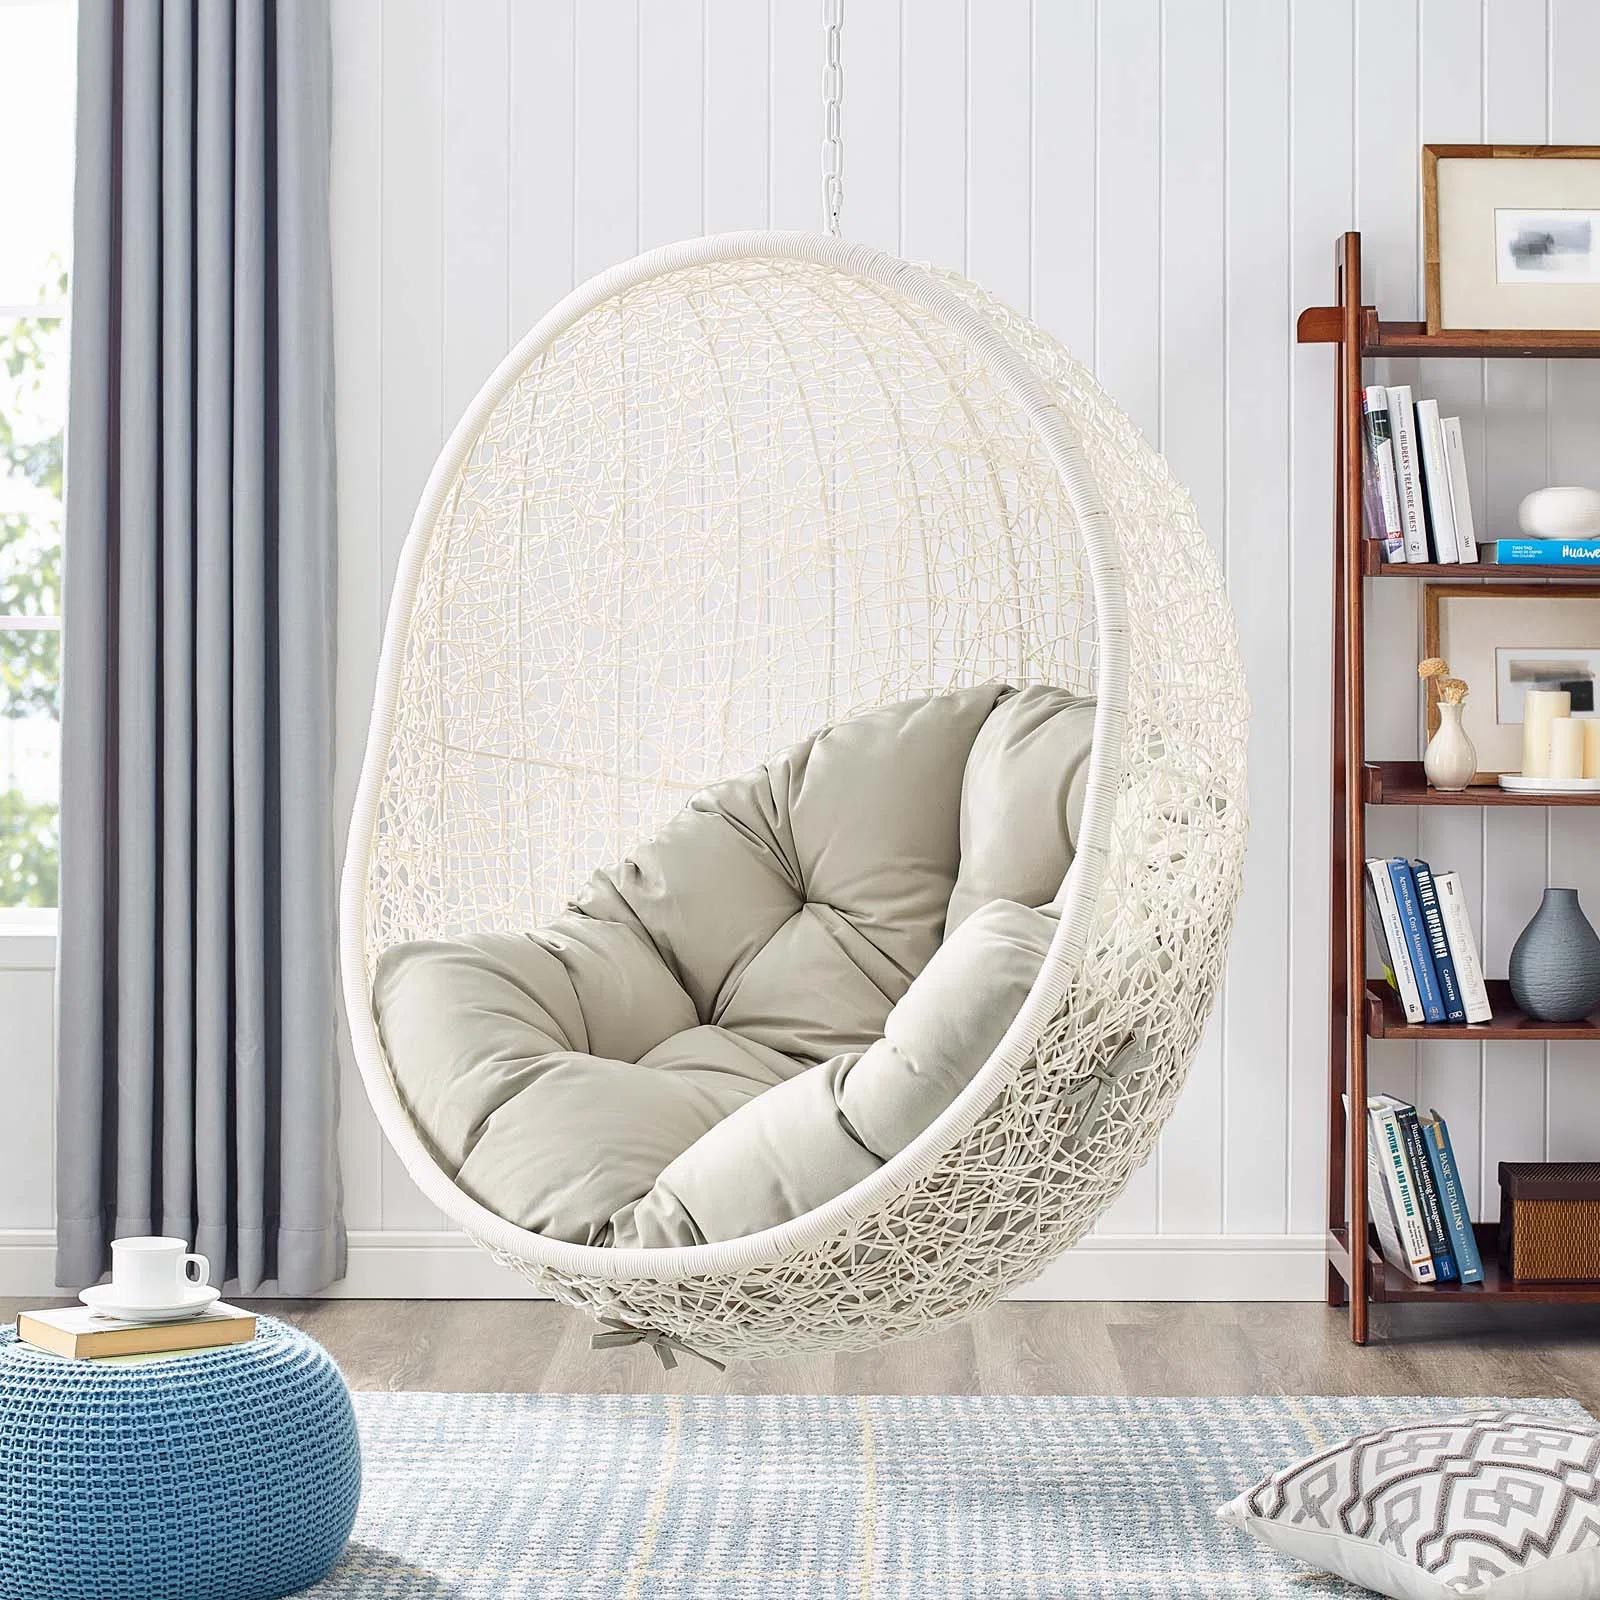 The 5 Best Hanging Chairs For Your Home